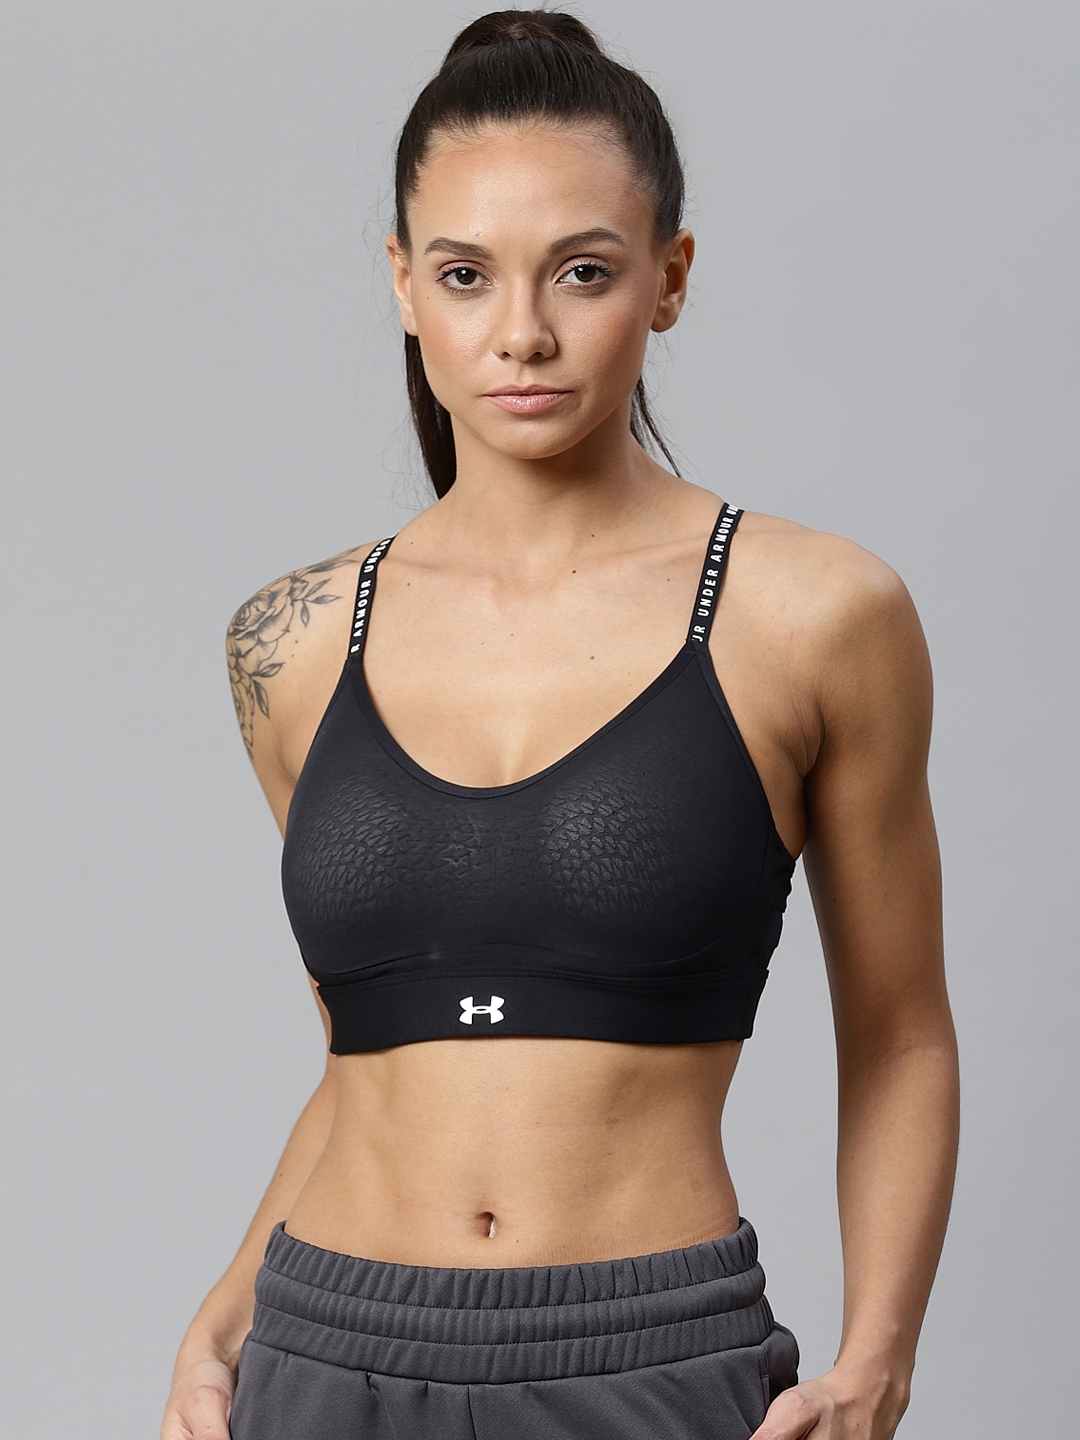 Buy UNDER ARMOUR Black Infinity Low Solid Lightly Padded Sports Bra 1351985 001 - Bra for Women 